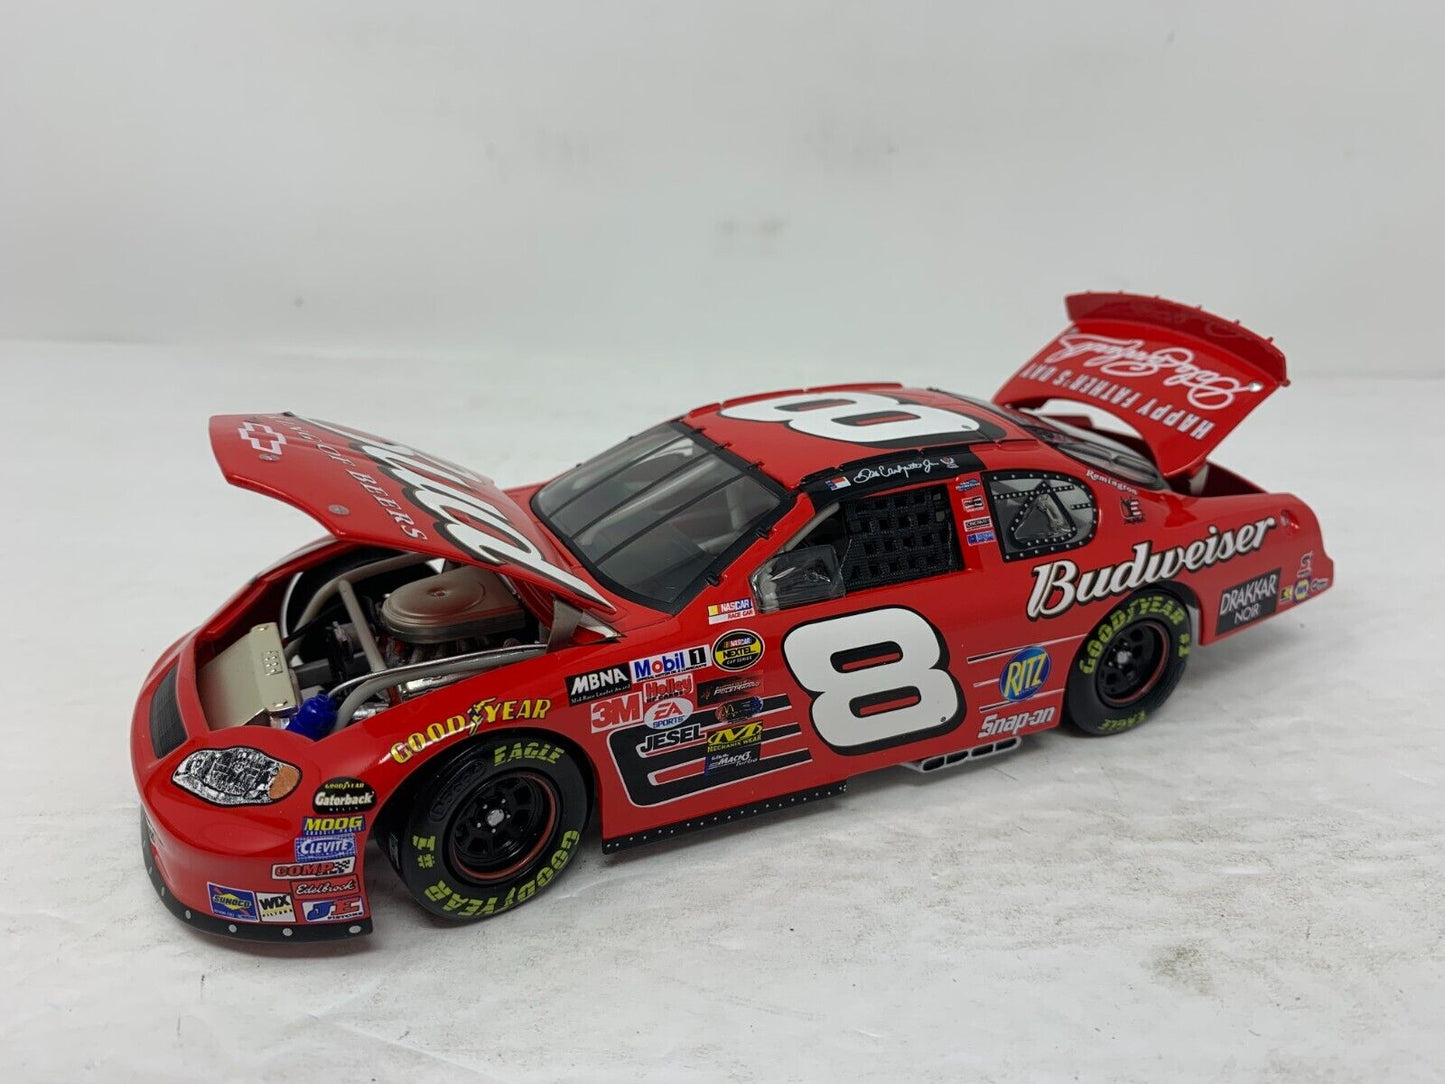 Action Nascar #8 Dale Earnhardt Jr. Bud Father's Day Monte Carlo 1:24 Diecast